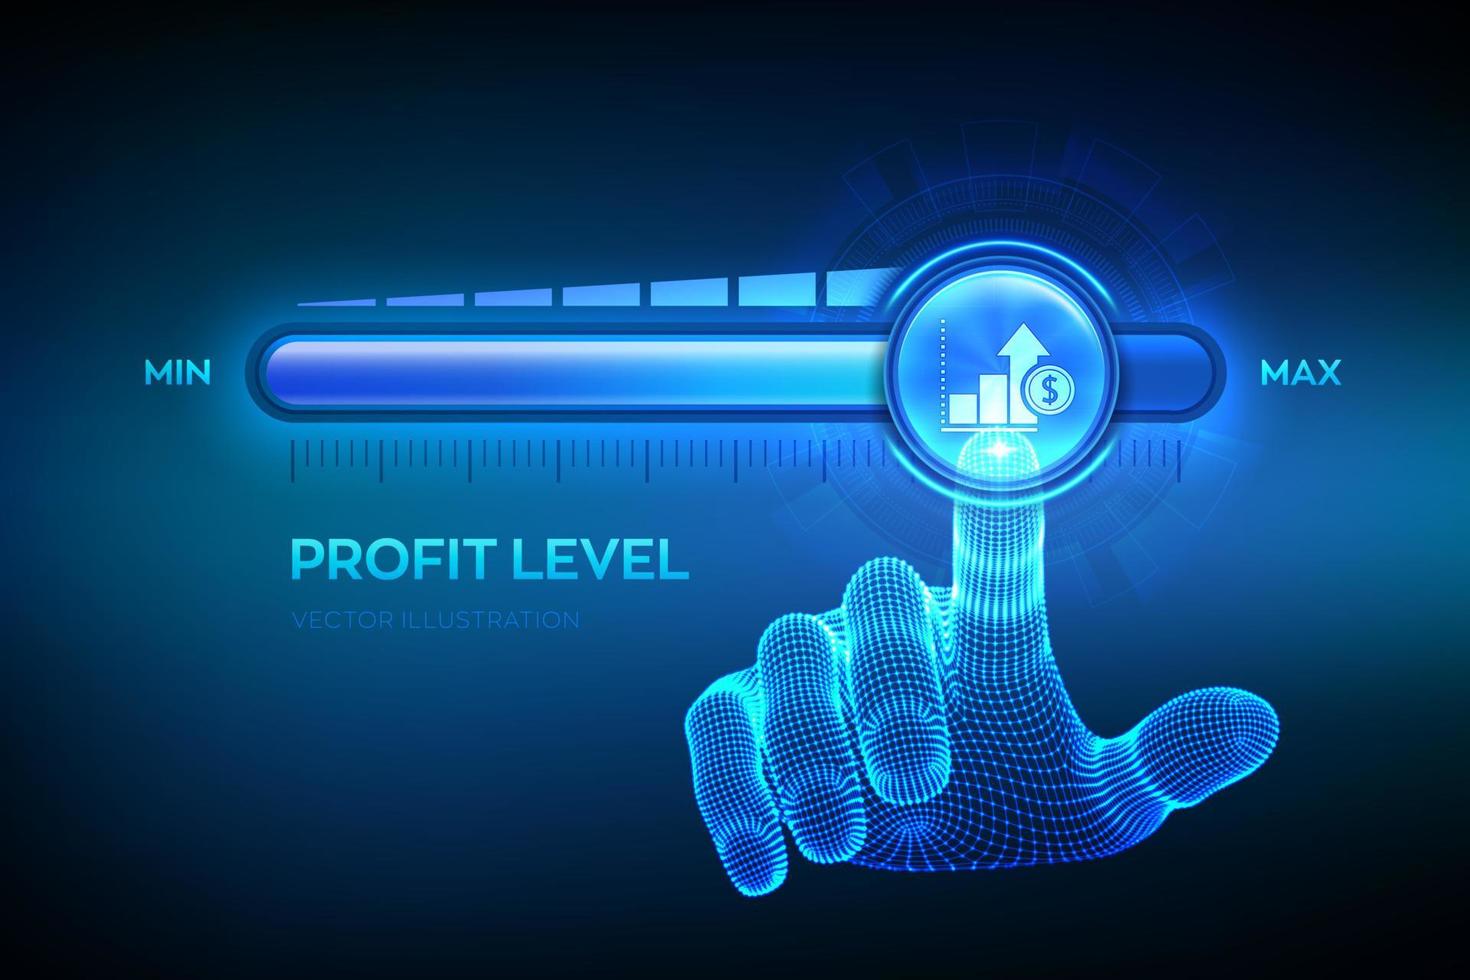 Increasing Profit Level. Wireframe hand is pulling up to the maximum position progress bar with the profit icon. Finance concept of profitability or return on investment. Vector illustration.